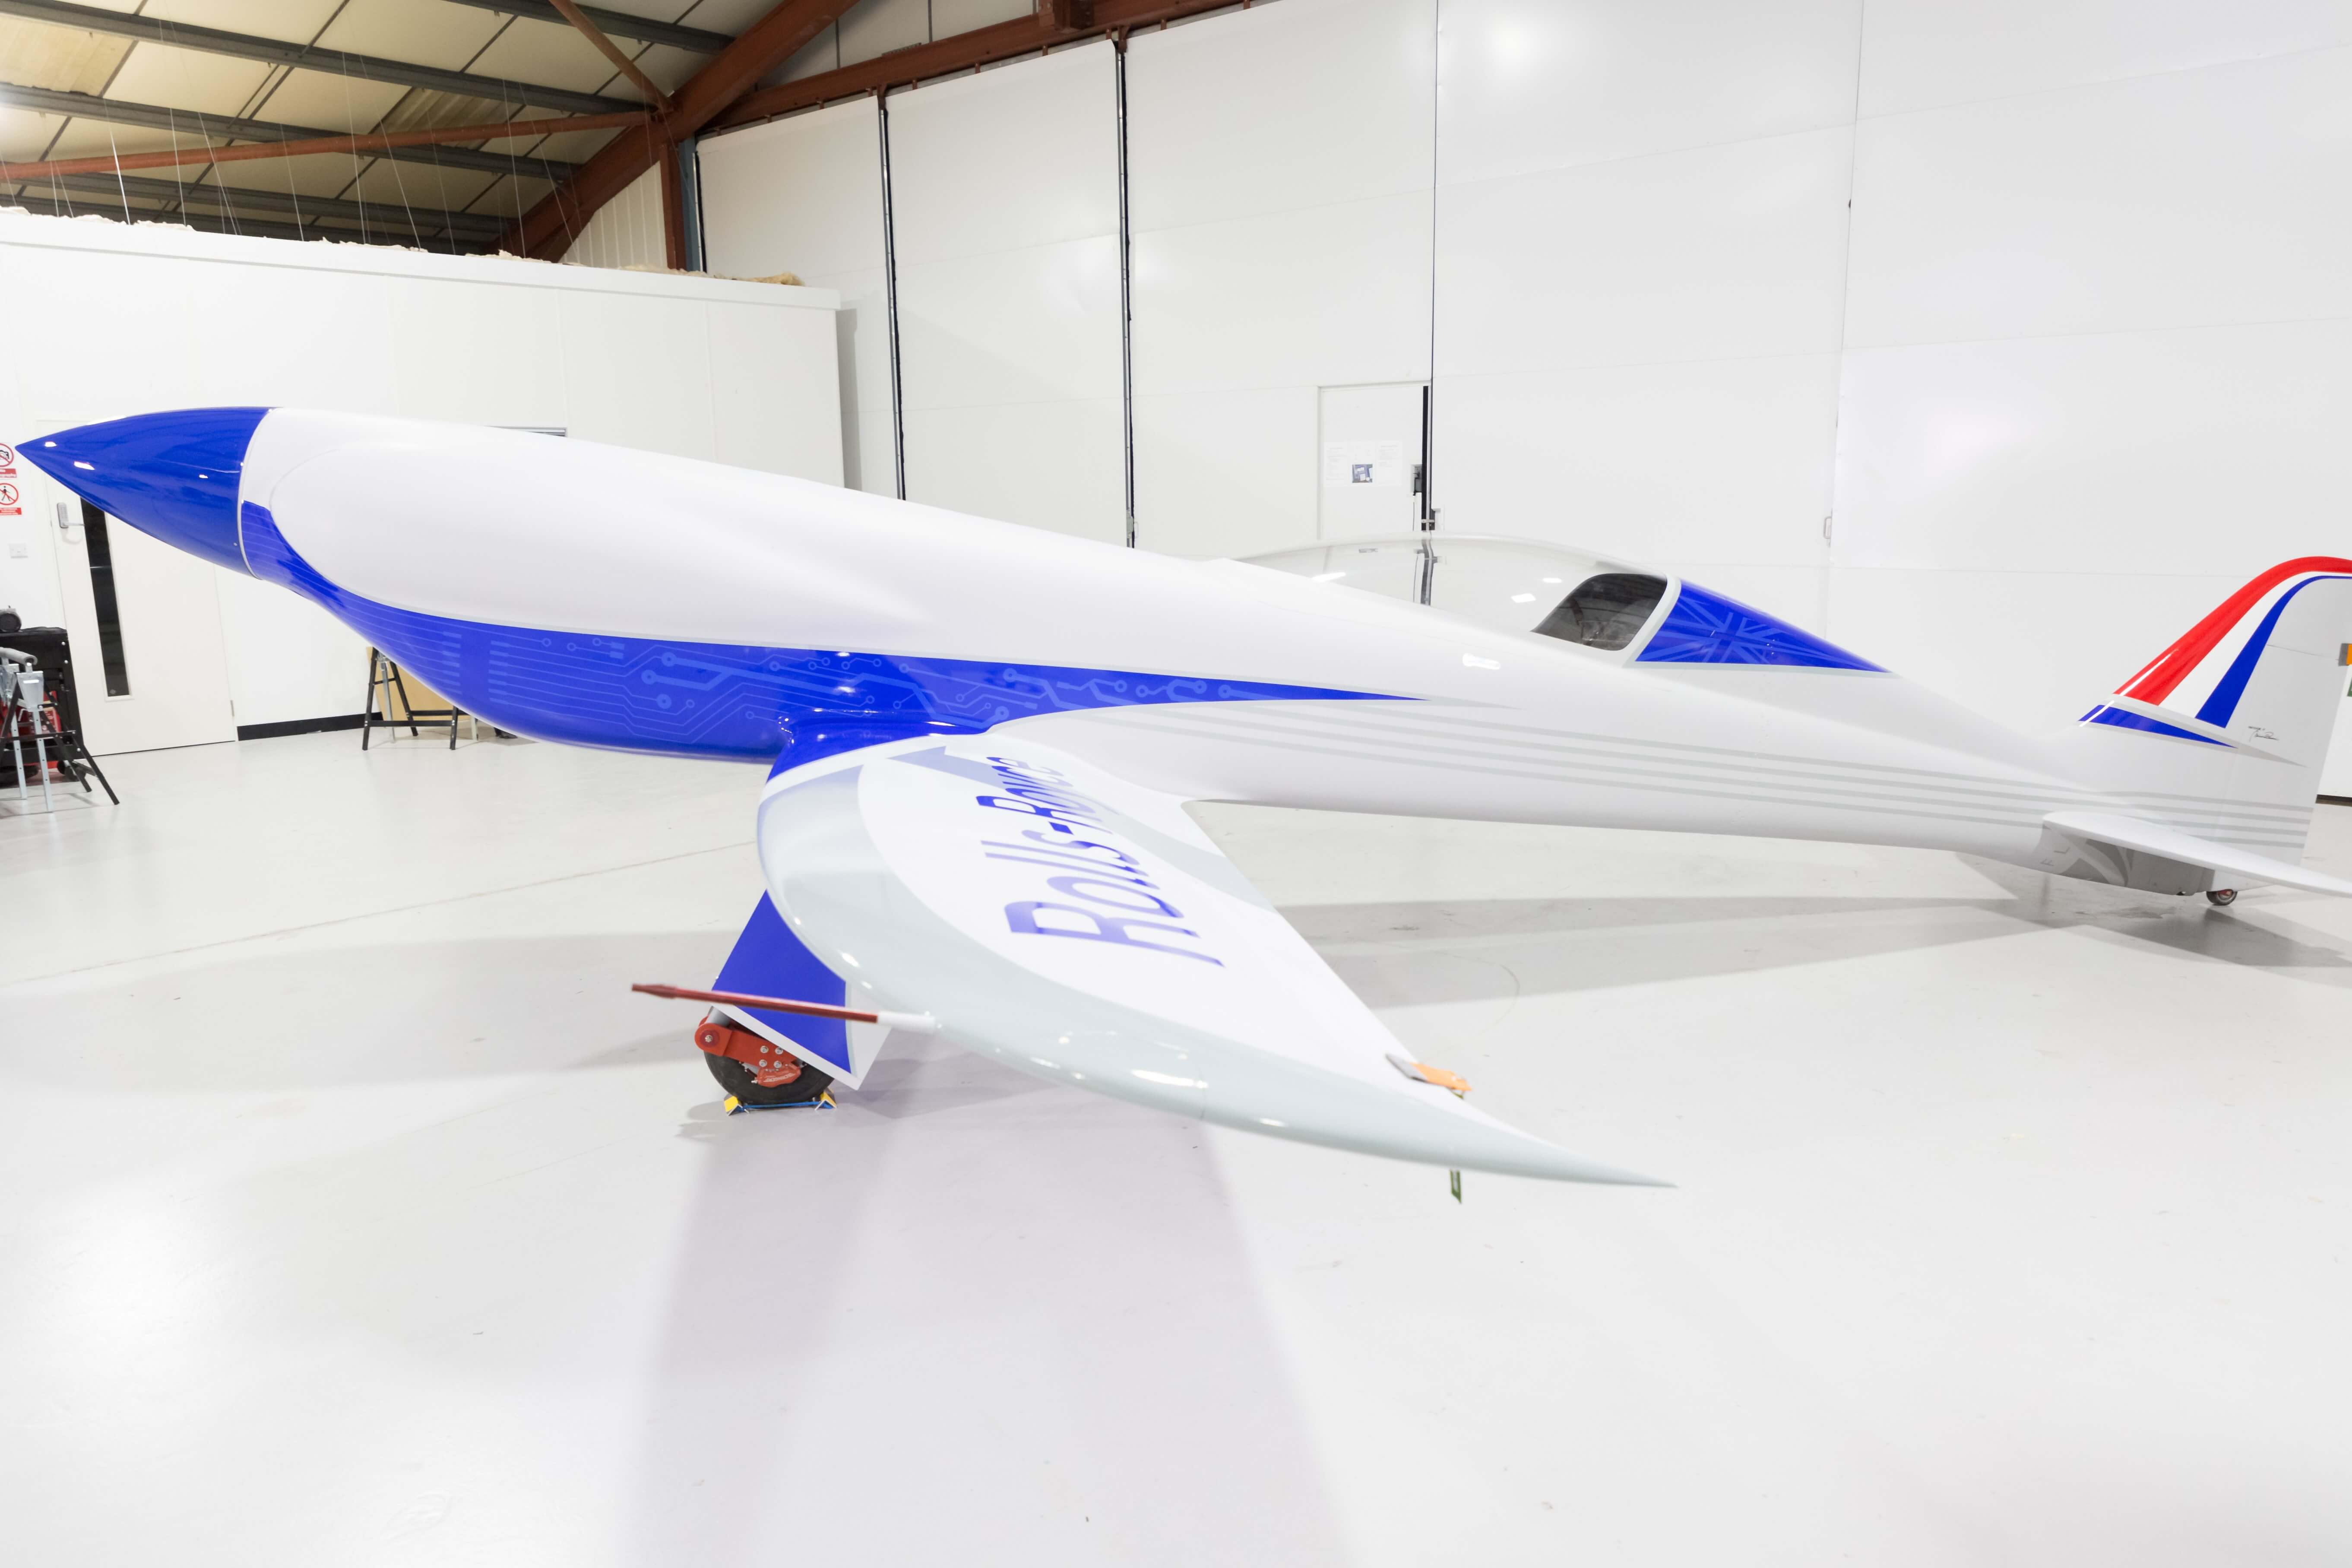  Rolls-Royce new electric aircraft takes off for first flight tes